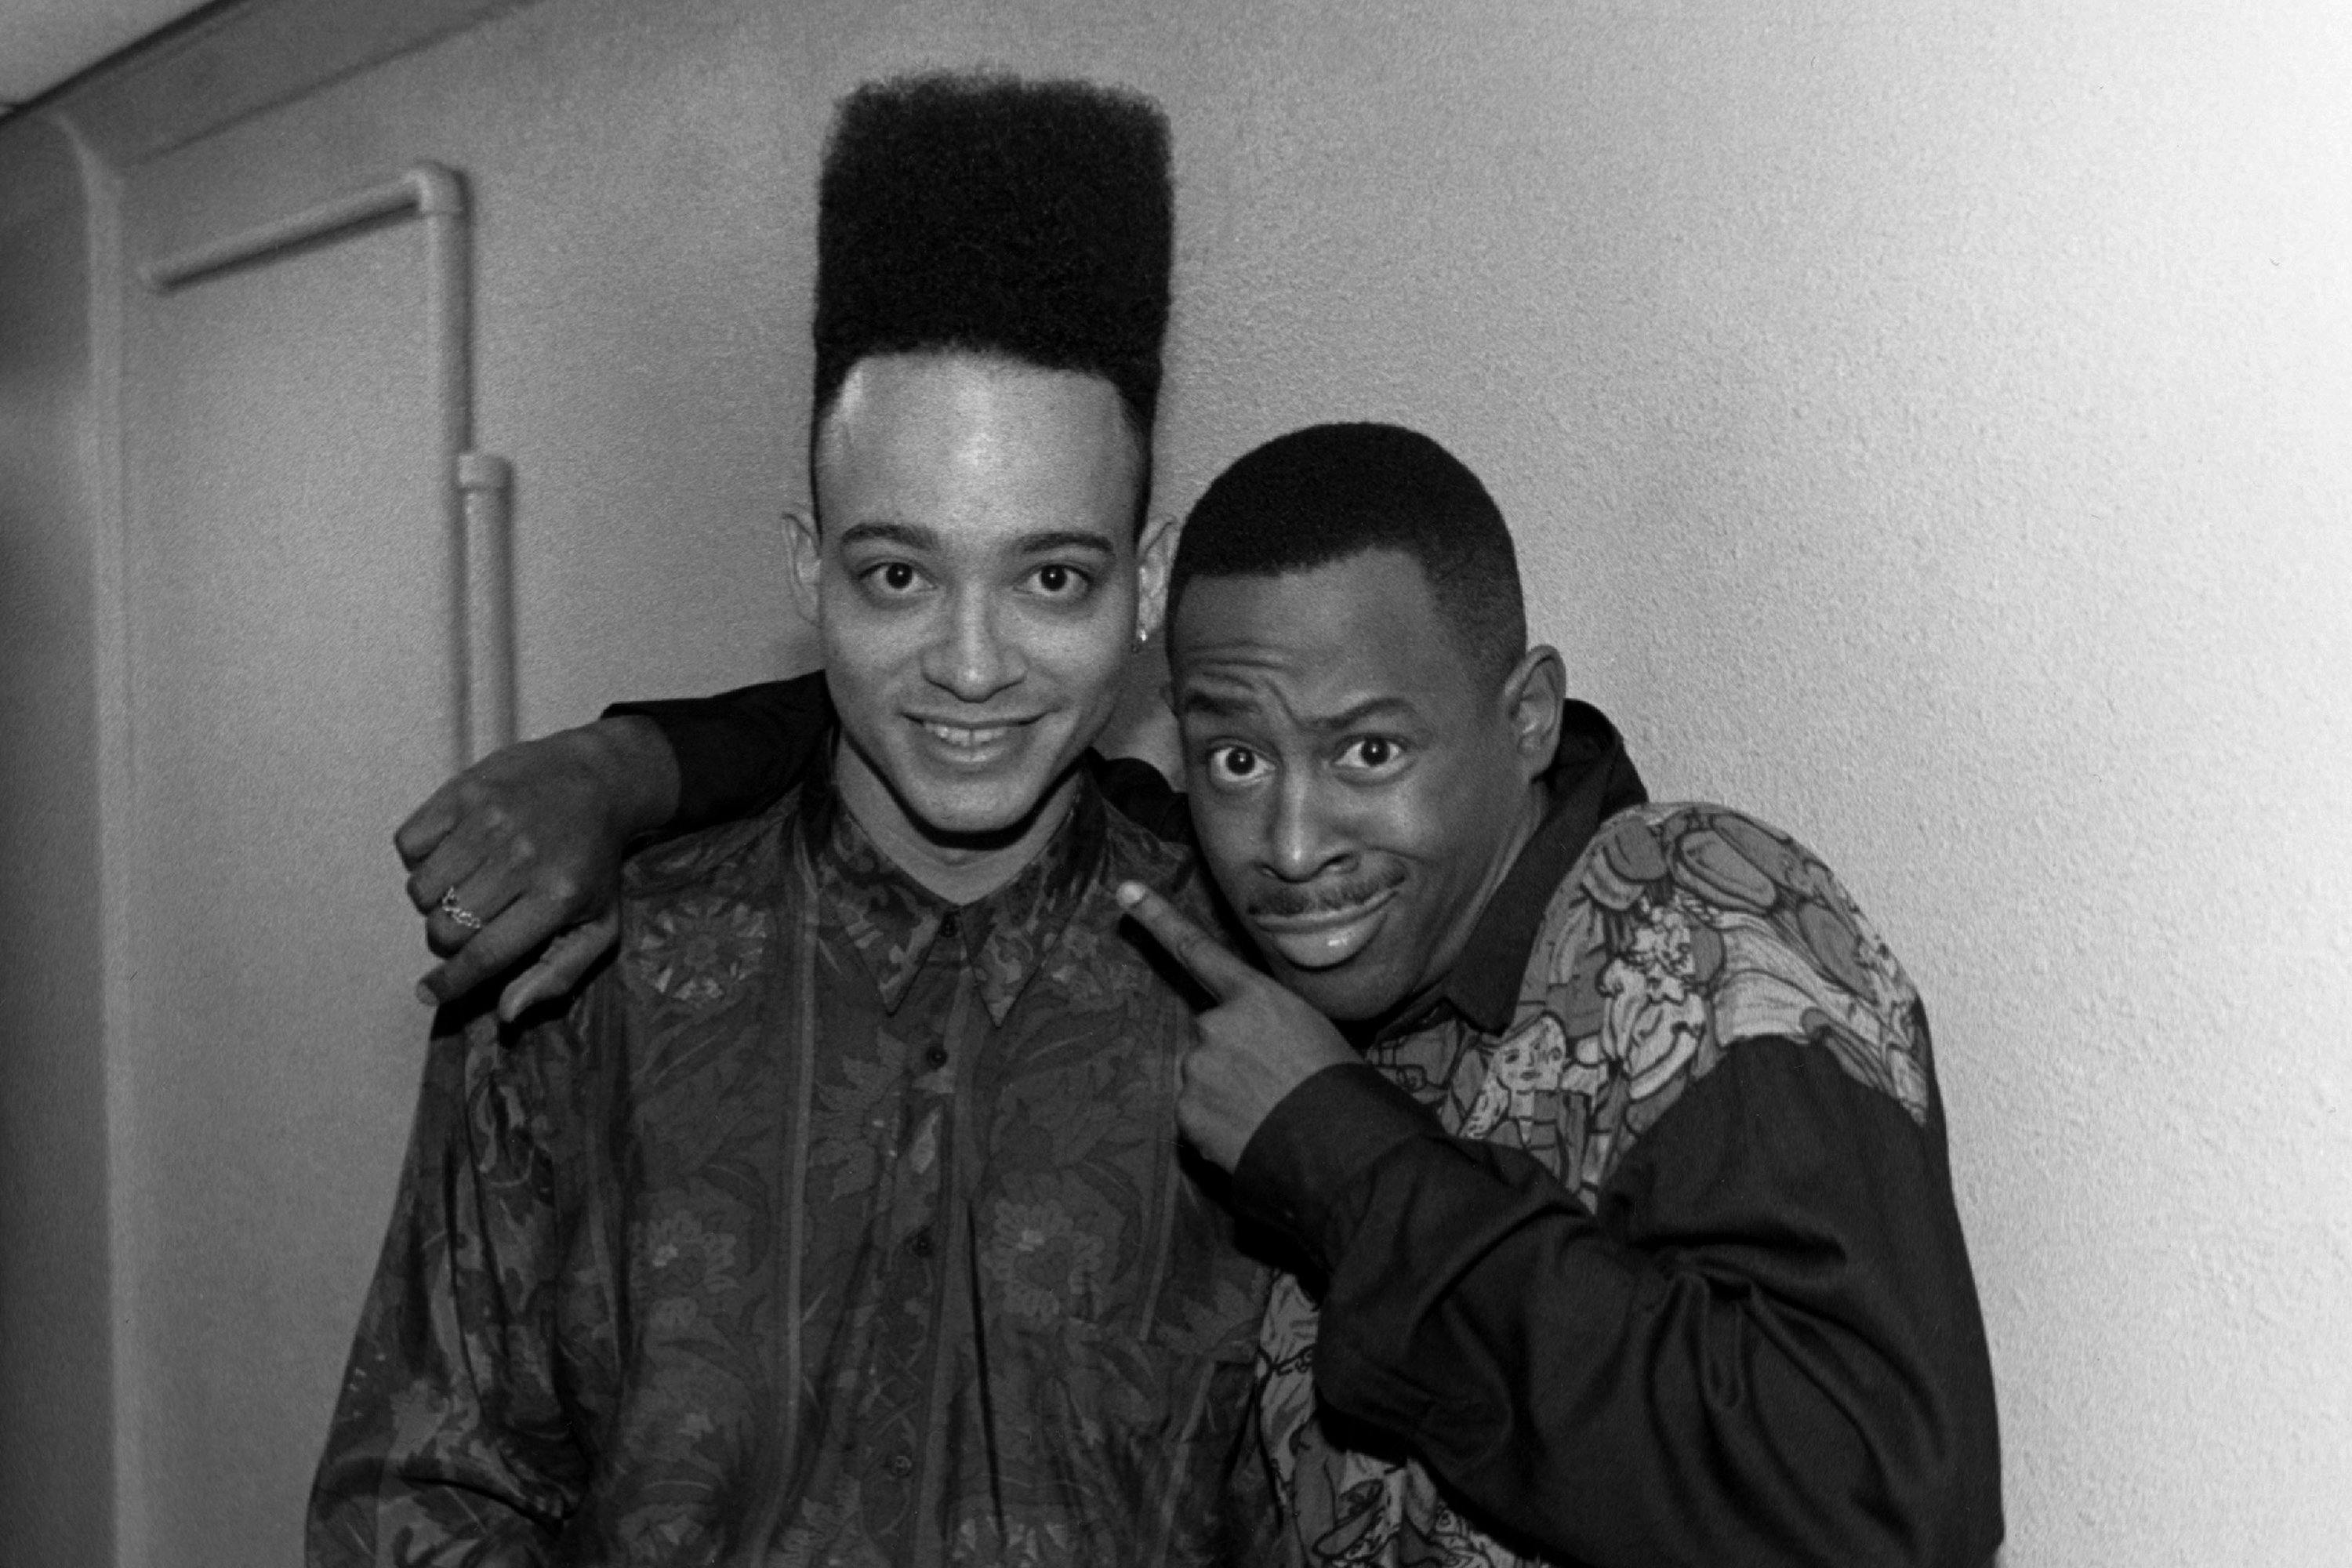 Christopher “Kid” Reid of Kid ‘n Play and comedian and actor Martin Lawrence